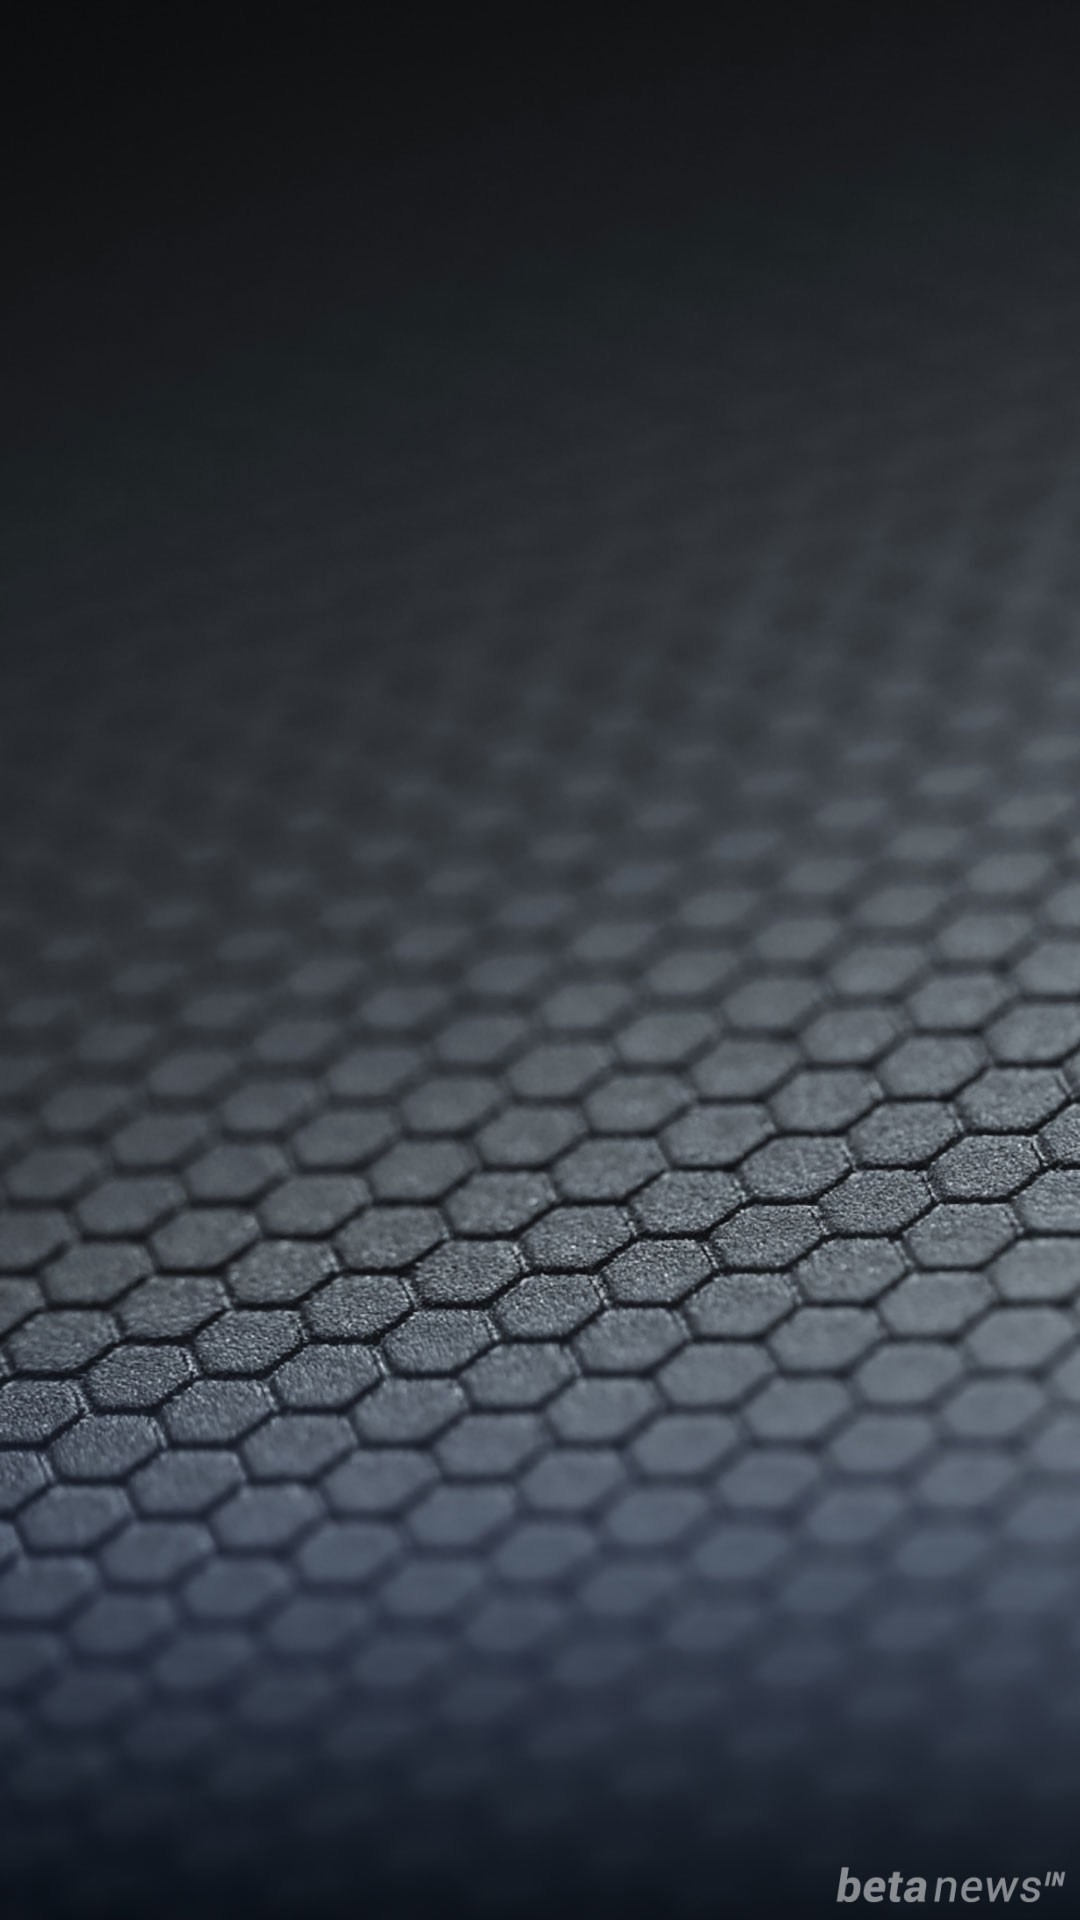 hd wallpapers for lenovo a7000,black,sky,pattern,carbon,floor